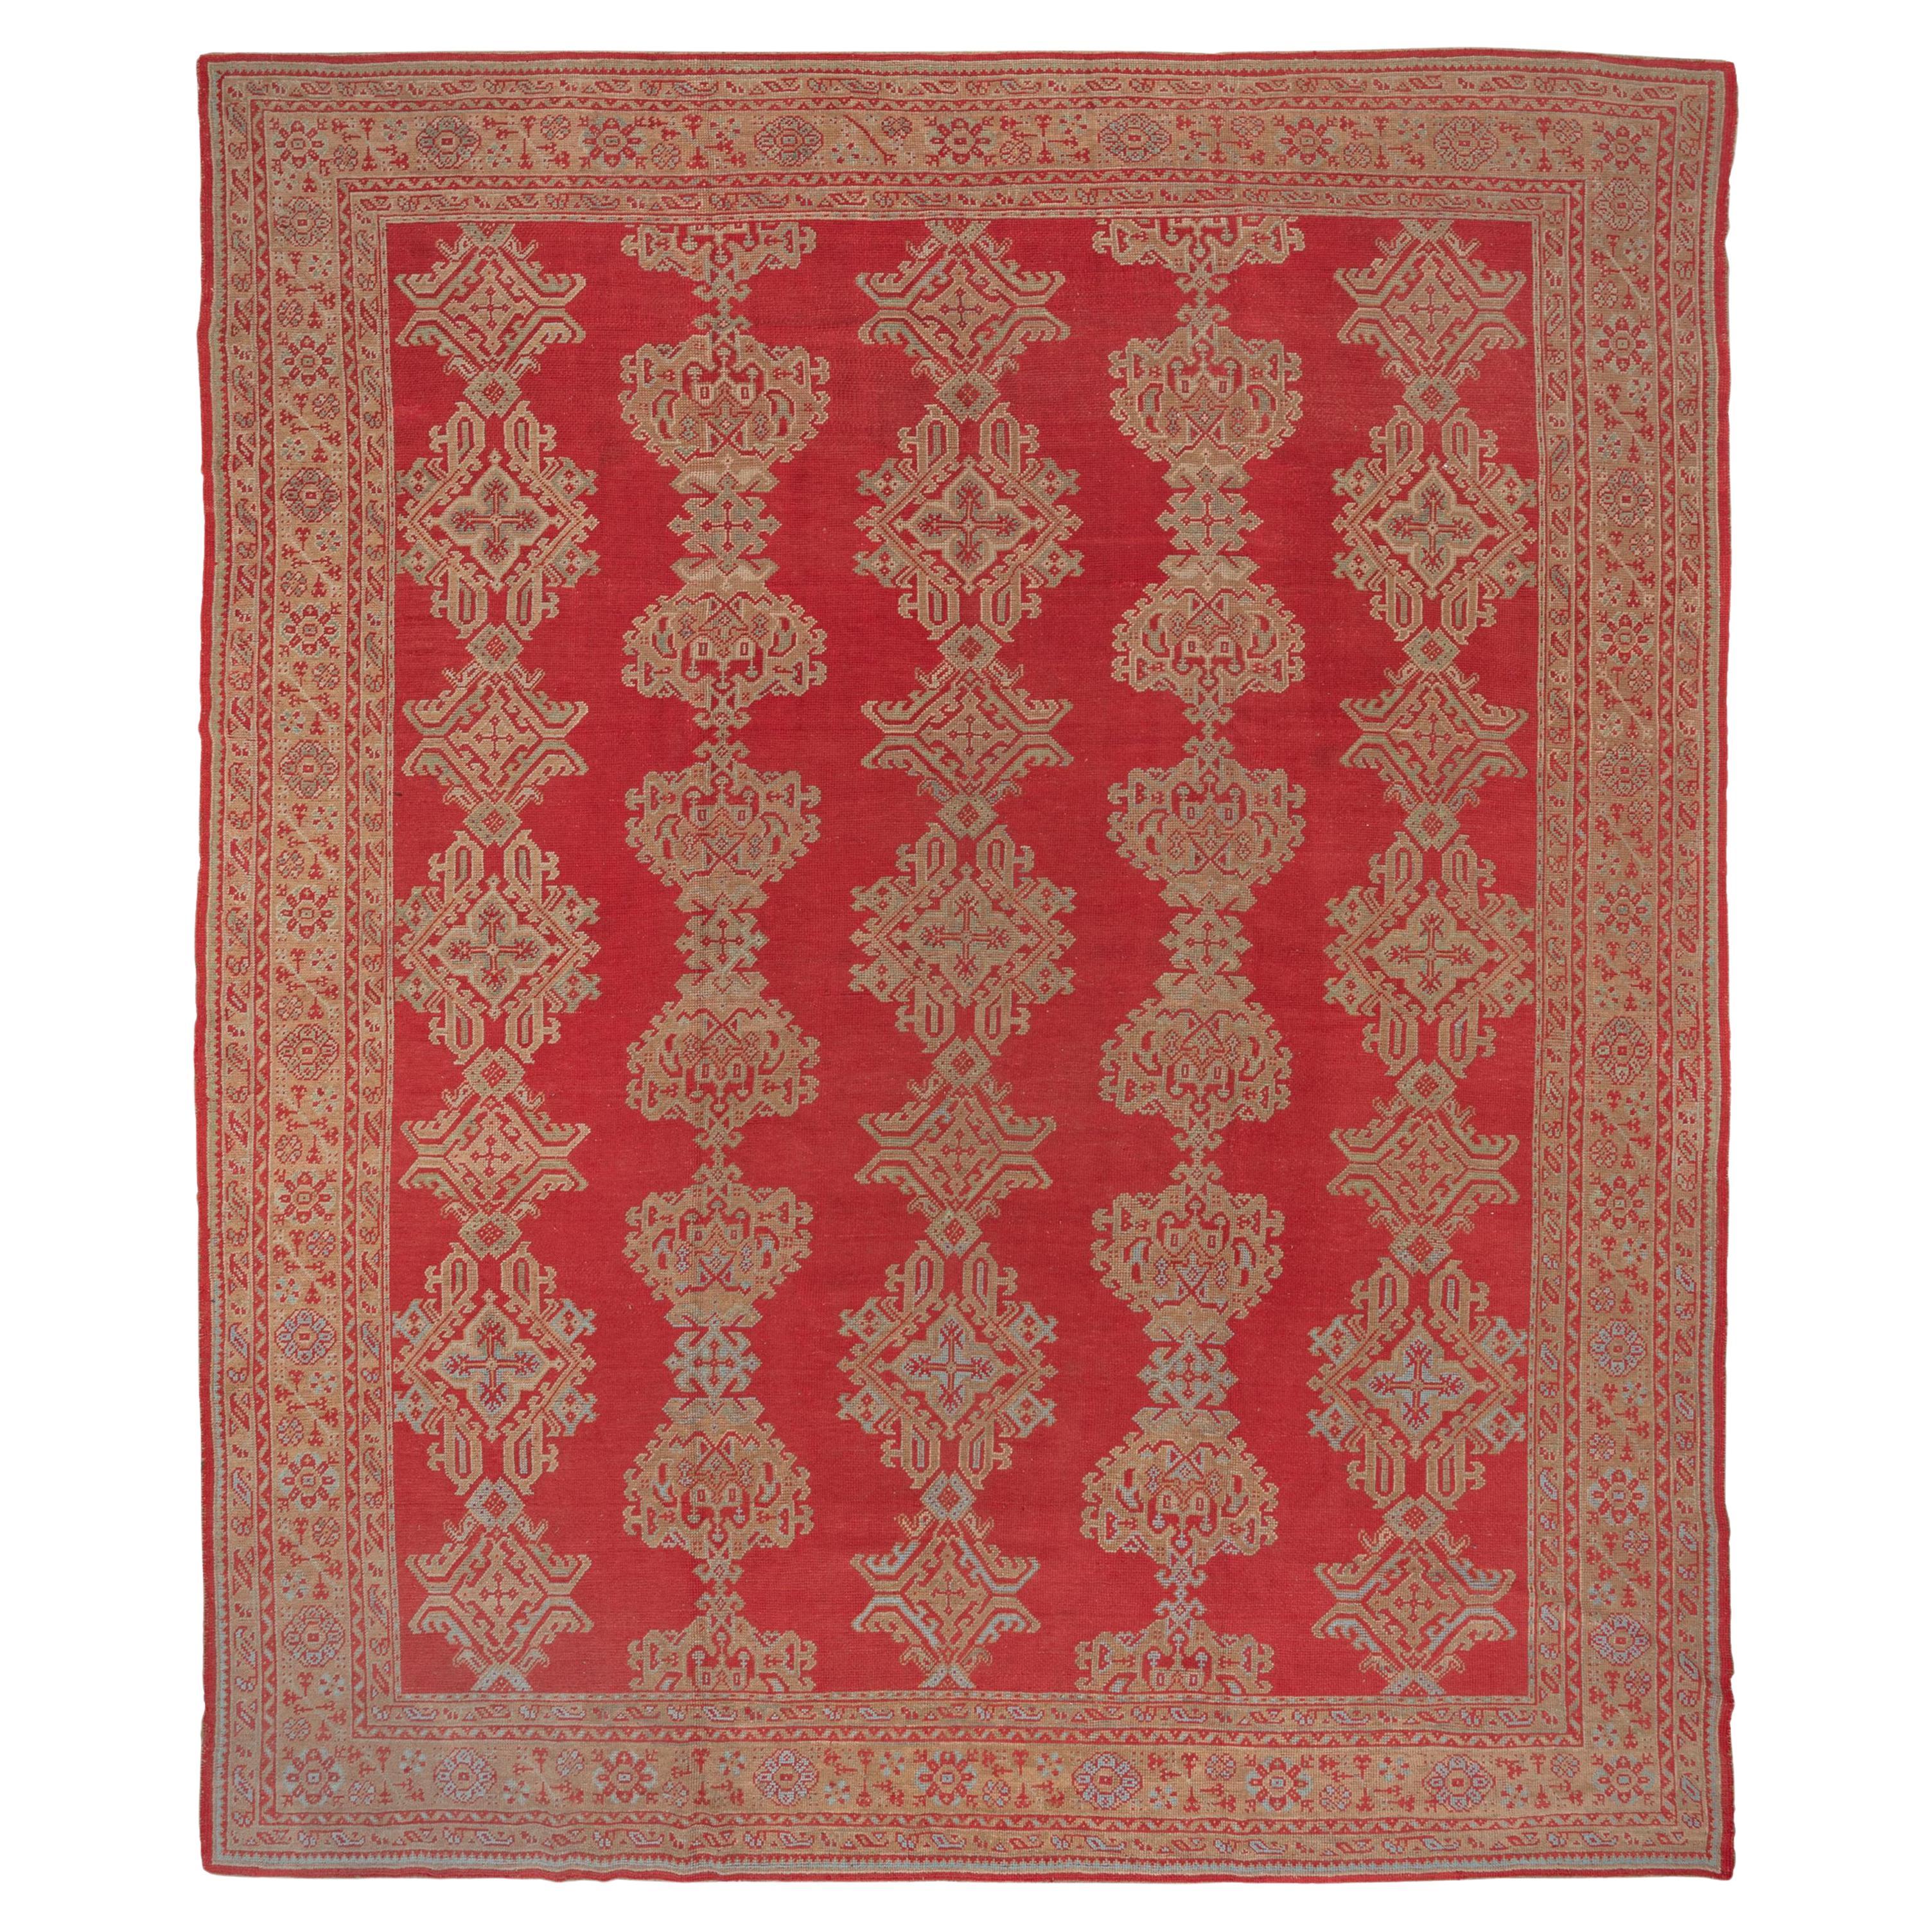 Early 20th Century Antique Red Oushak Carpet